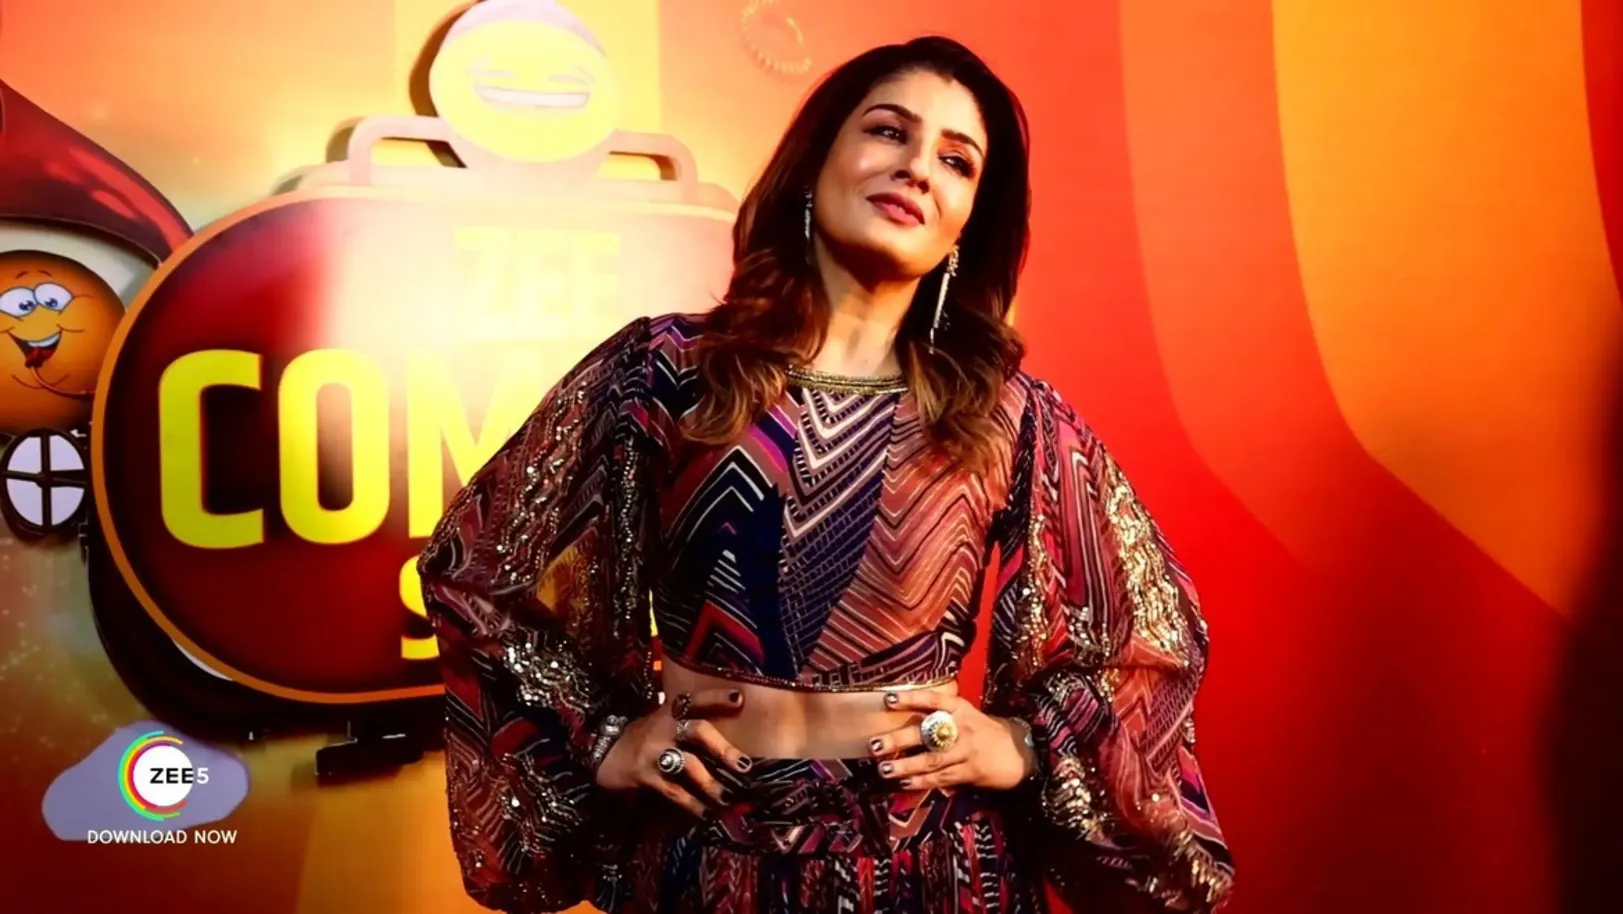 Raveena Tandon Dances with Everyone | Behind The Scenes | Zee Comedy Show 13th September 2021 Webisode